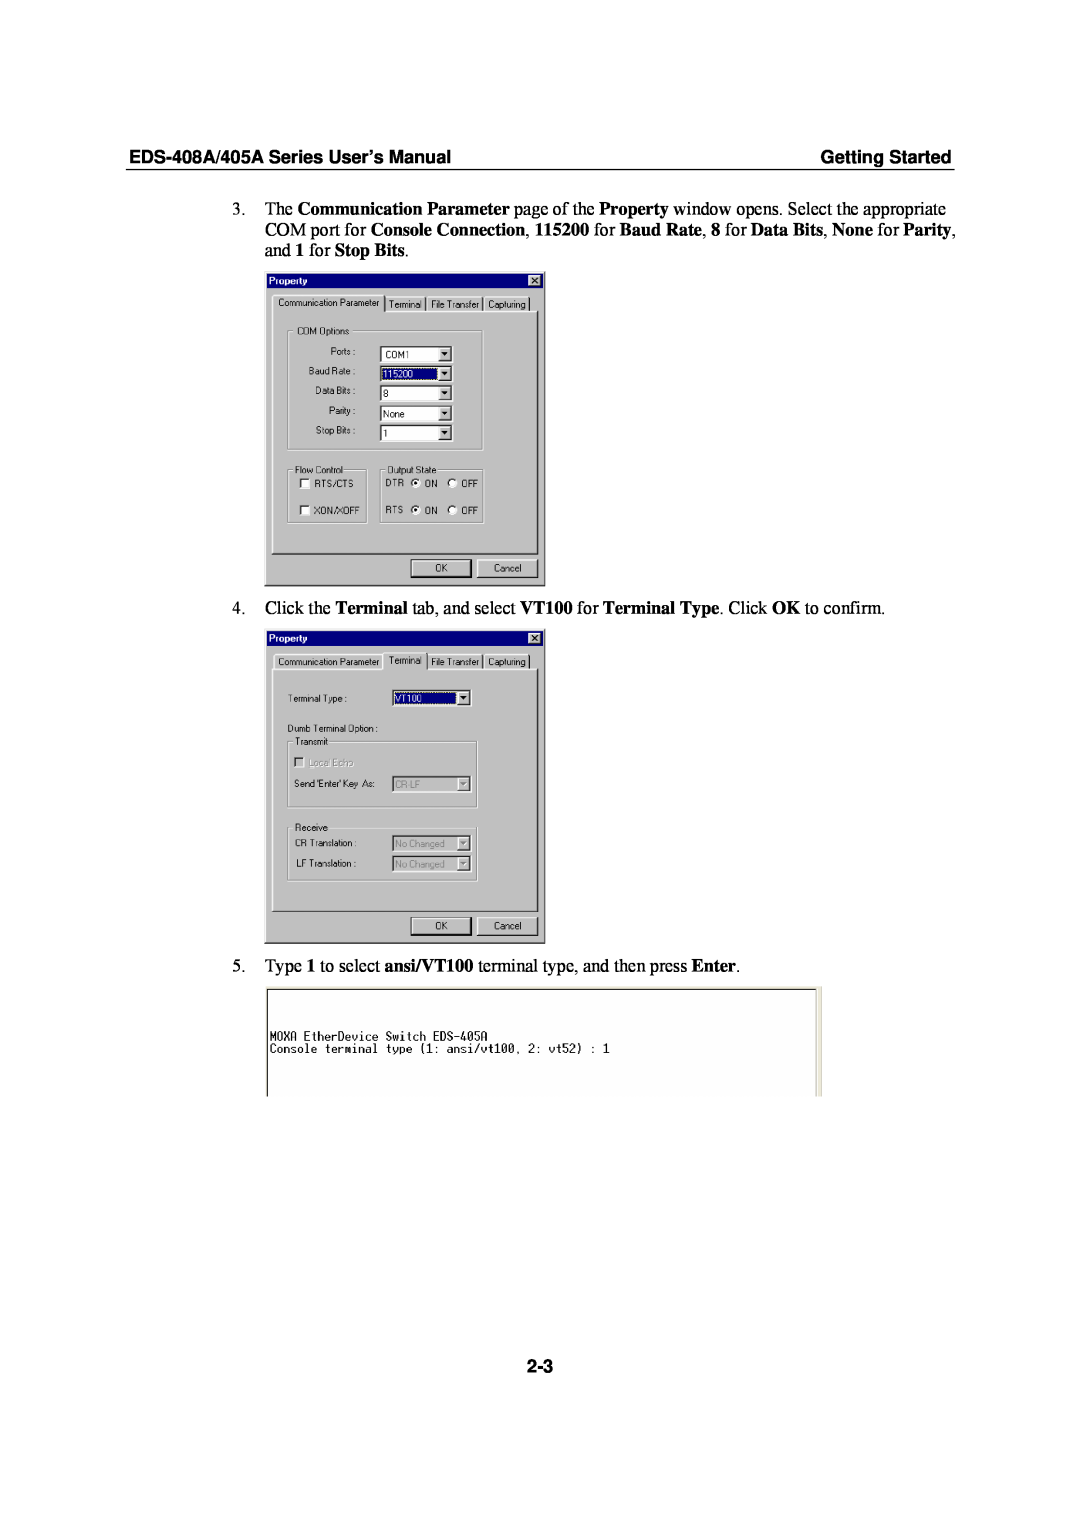 Moxa Technologies EDS-405A user manual Getting Started, EDS-408A/405A Series User’s Manual 